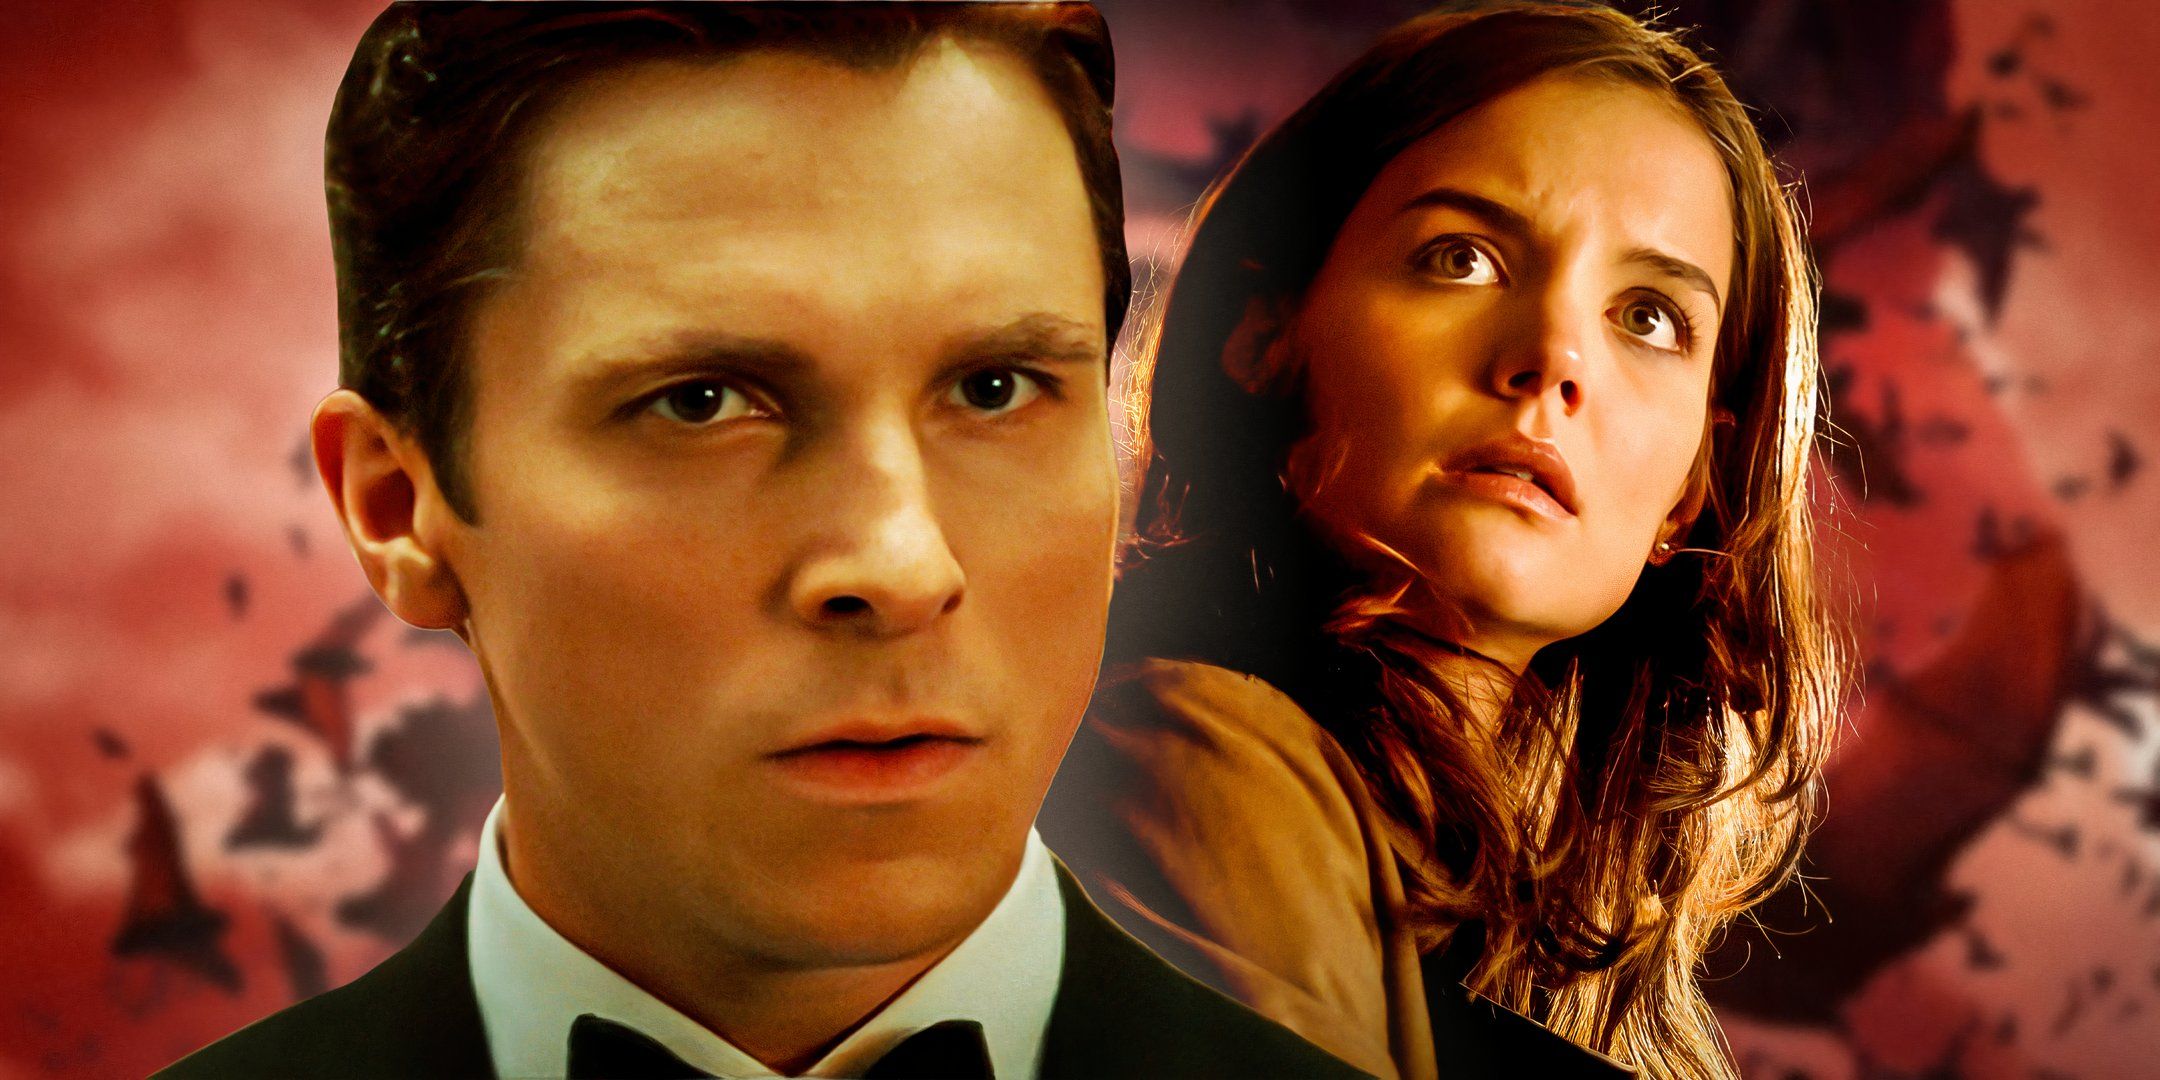 Batman Begins Cast - Where Are They Now?